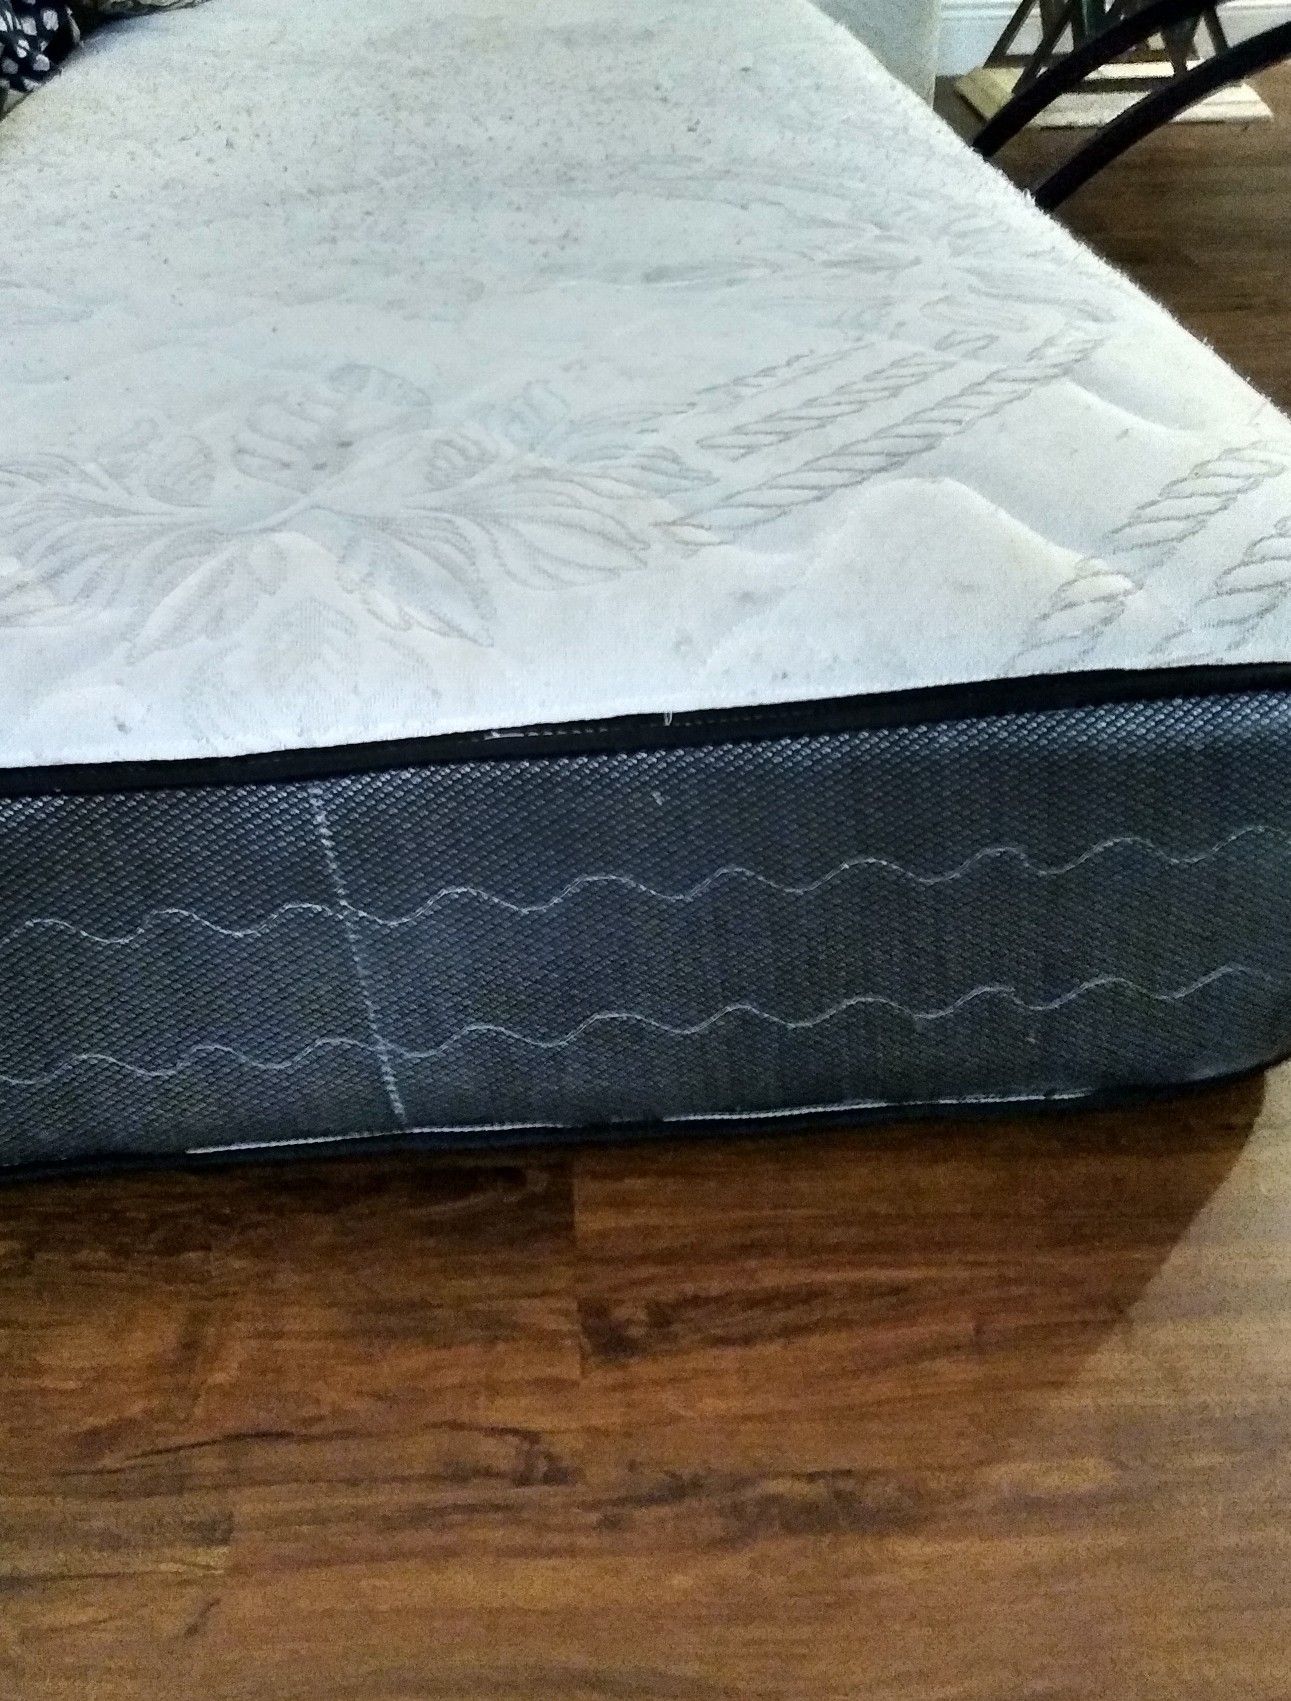 Twin Mattress with stand (never used)